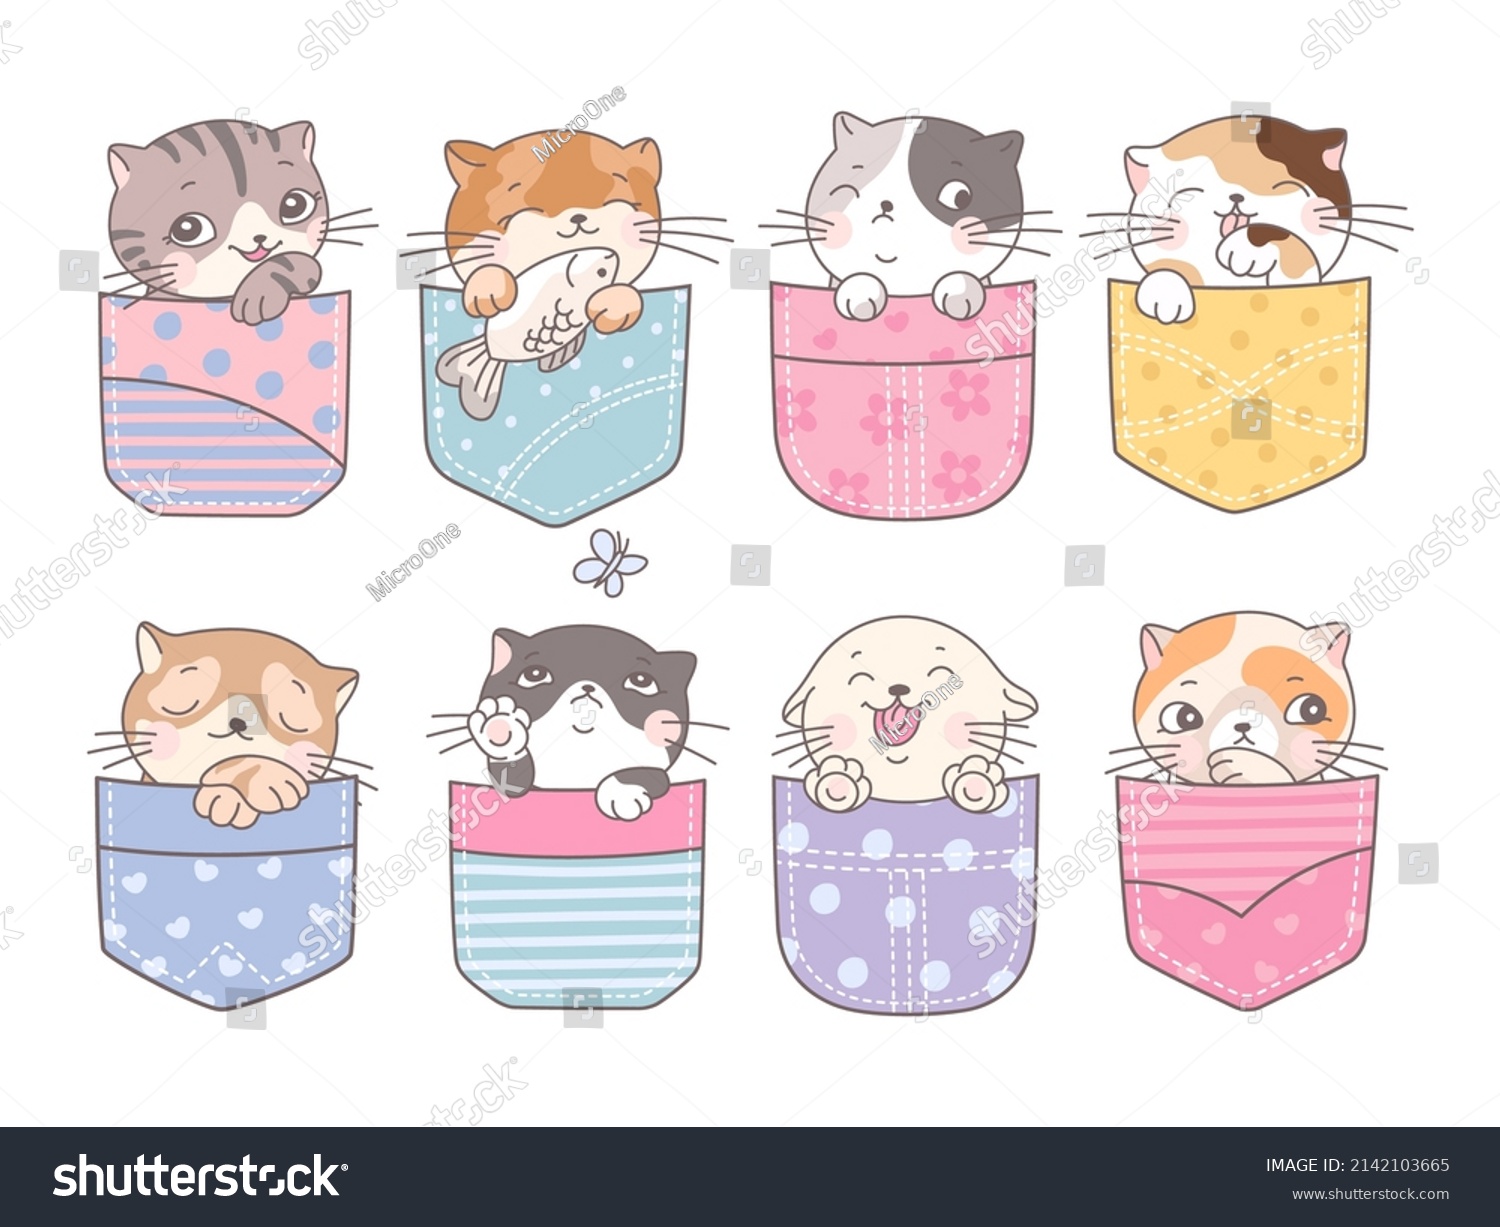 SVG of Doodle pocket cats. Kitten in pockets, happy cartoon cute cat. Fashion baby pet, adorable kittens faces. Childish mascot, kids decorative nowaday vector characters svg